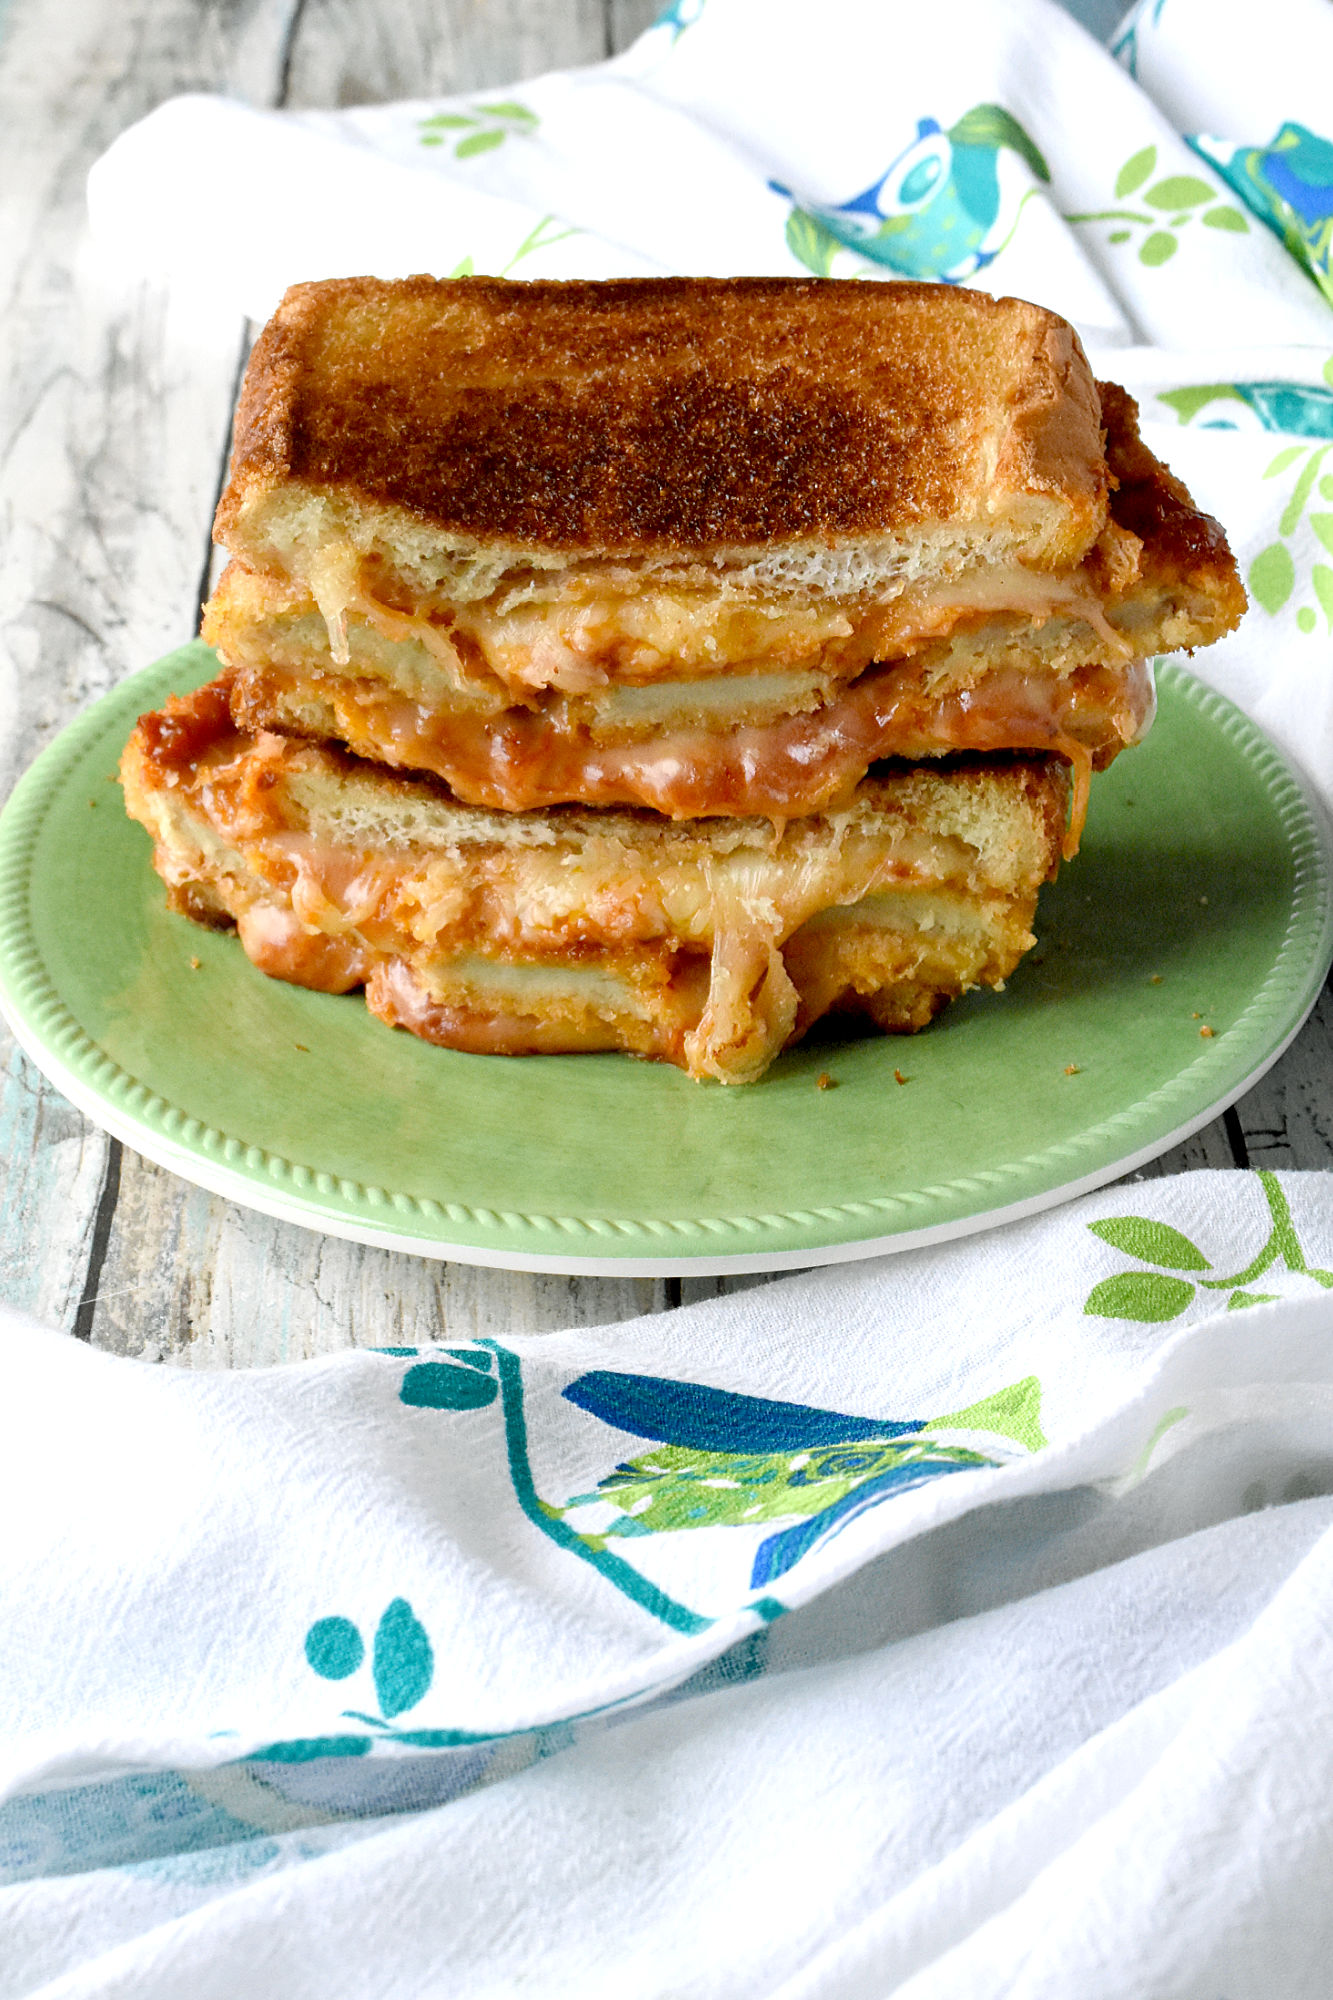 Chicken Parm Grilled Cheese is packed with chicken, cheese, and sauce. Made with thick Texas toast, premade chicken strips and sauce, it’s a simple and simply hearty grilled cheese for lunch or dinner. #OurFamilyTable